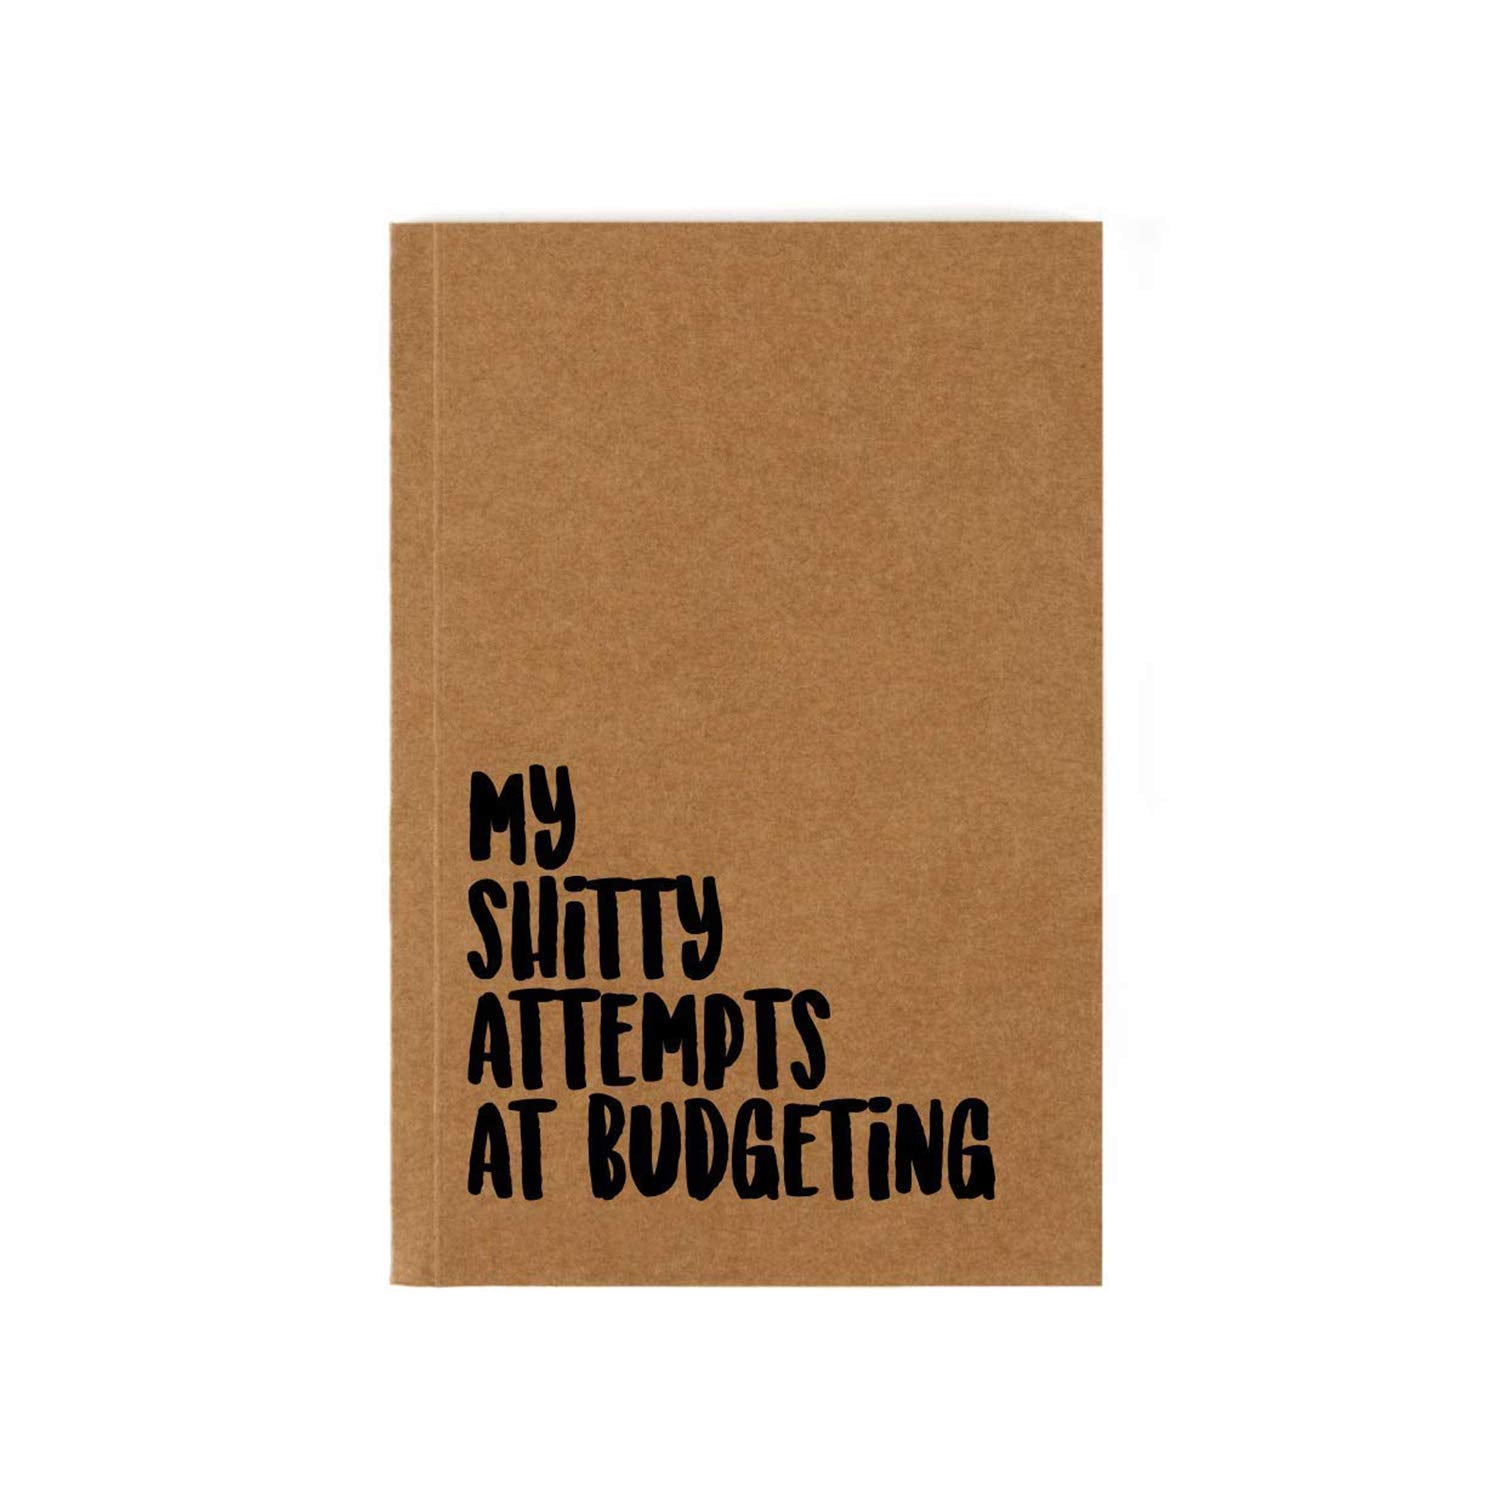 Kids Mandi pocket size notebook journal, perfect for corporate gifts.